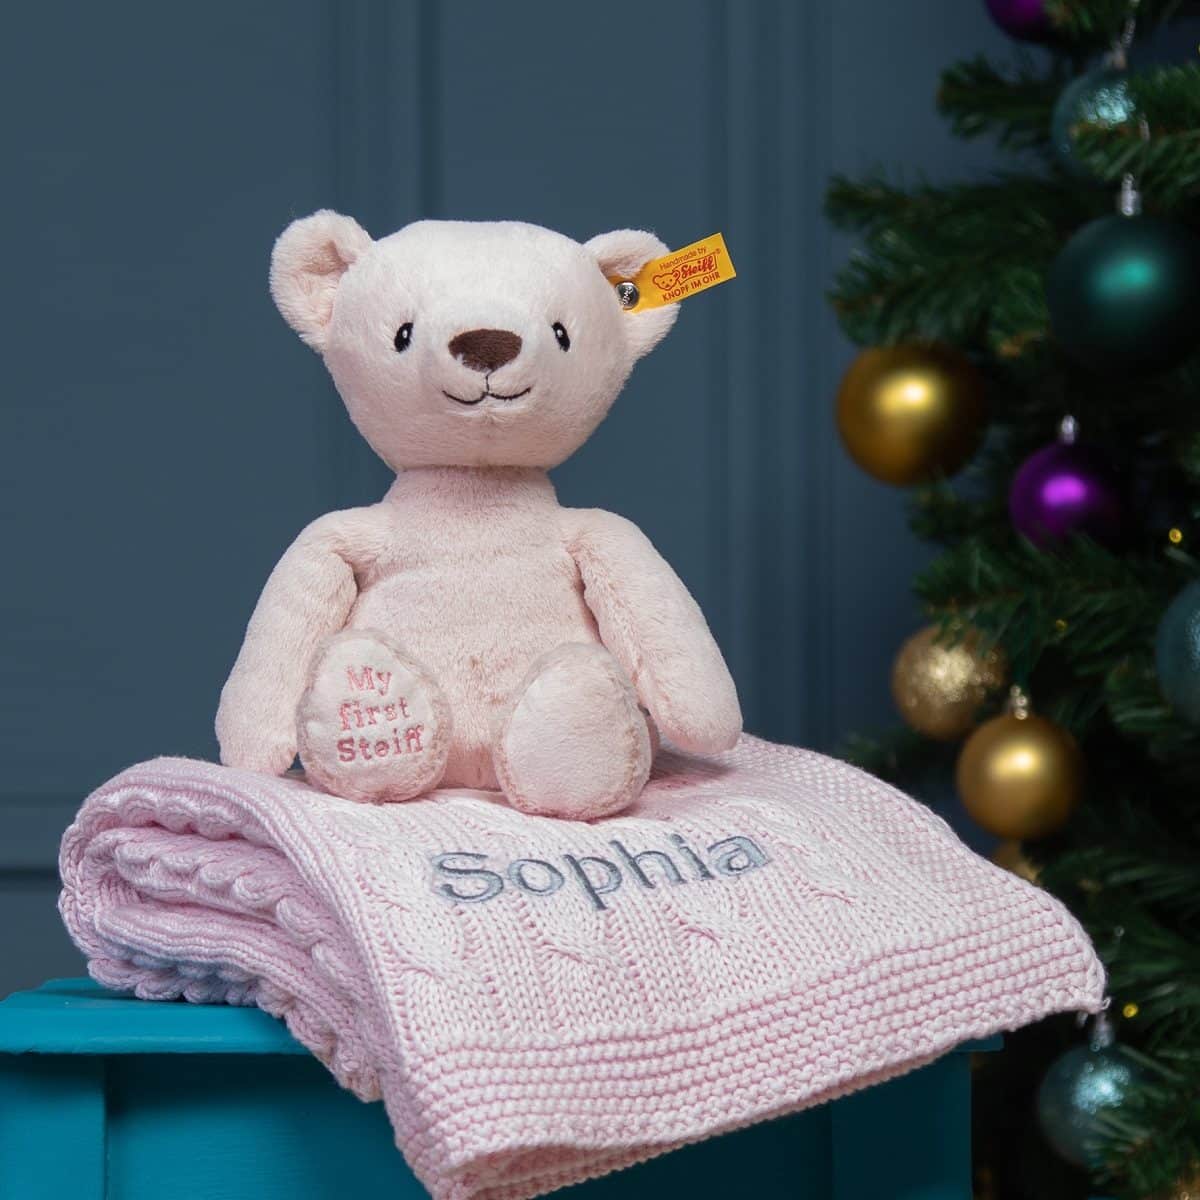 My First Steiff Teddy Bear pink soft toy and Toffee Moon luxury cable blanket gift set Blankets 2